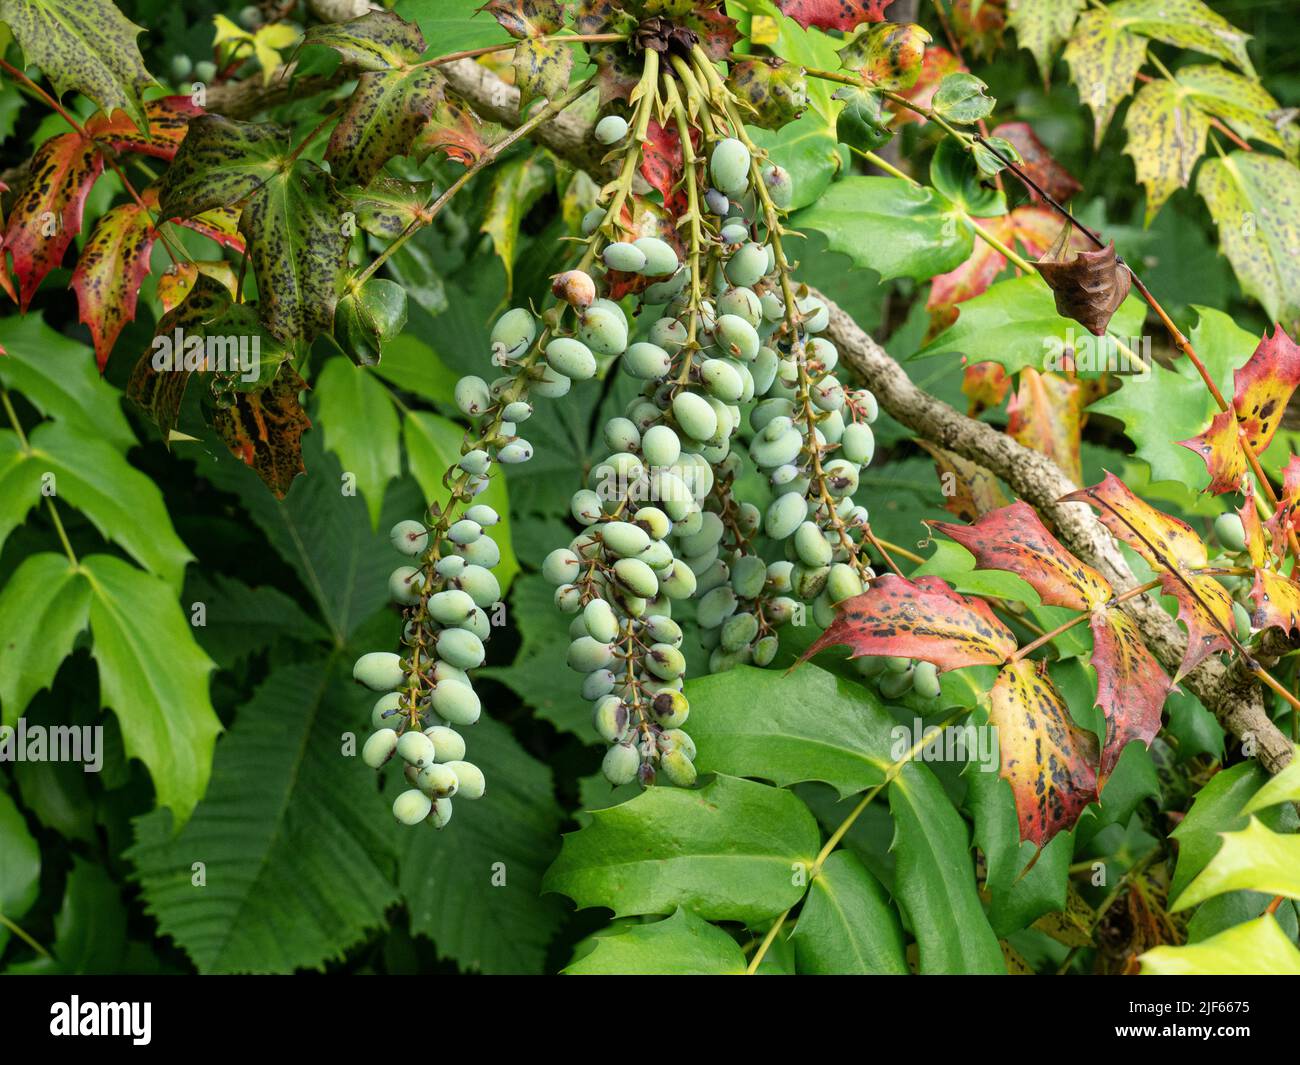 A close up of the green oval shaped berries of a Mahonia plant Stock Photo